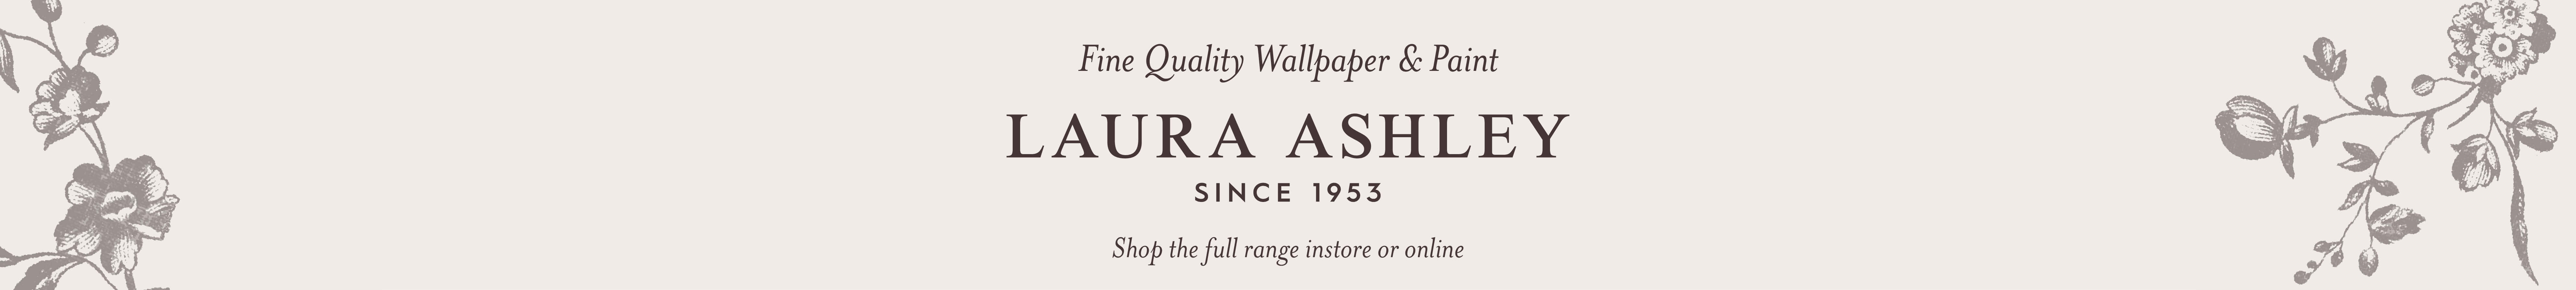 Fine quality Wallpaper & paint - Laura Ashley Since 1953 - Ship the full range instore or online